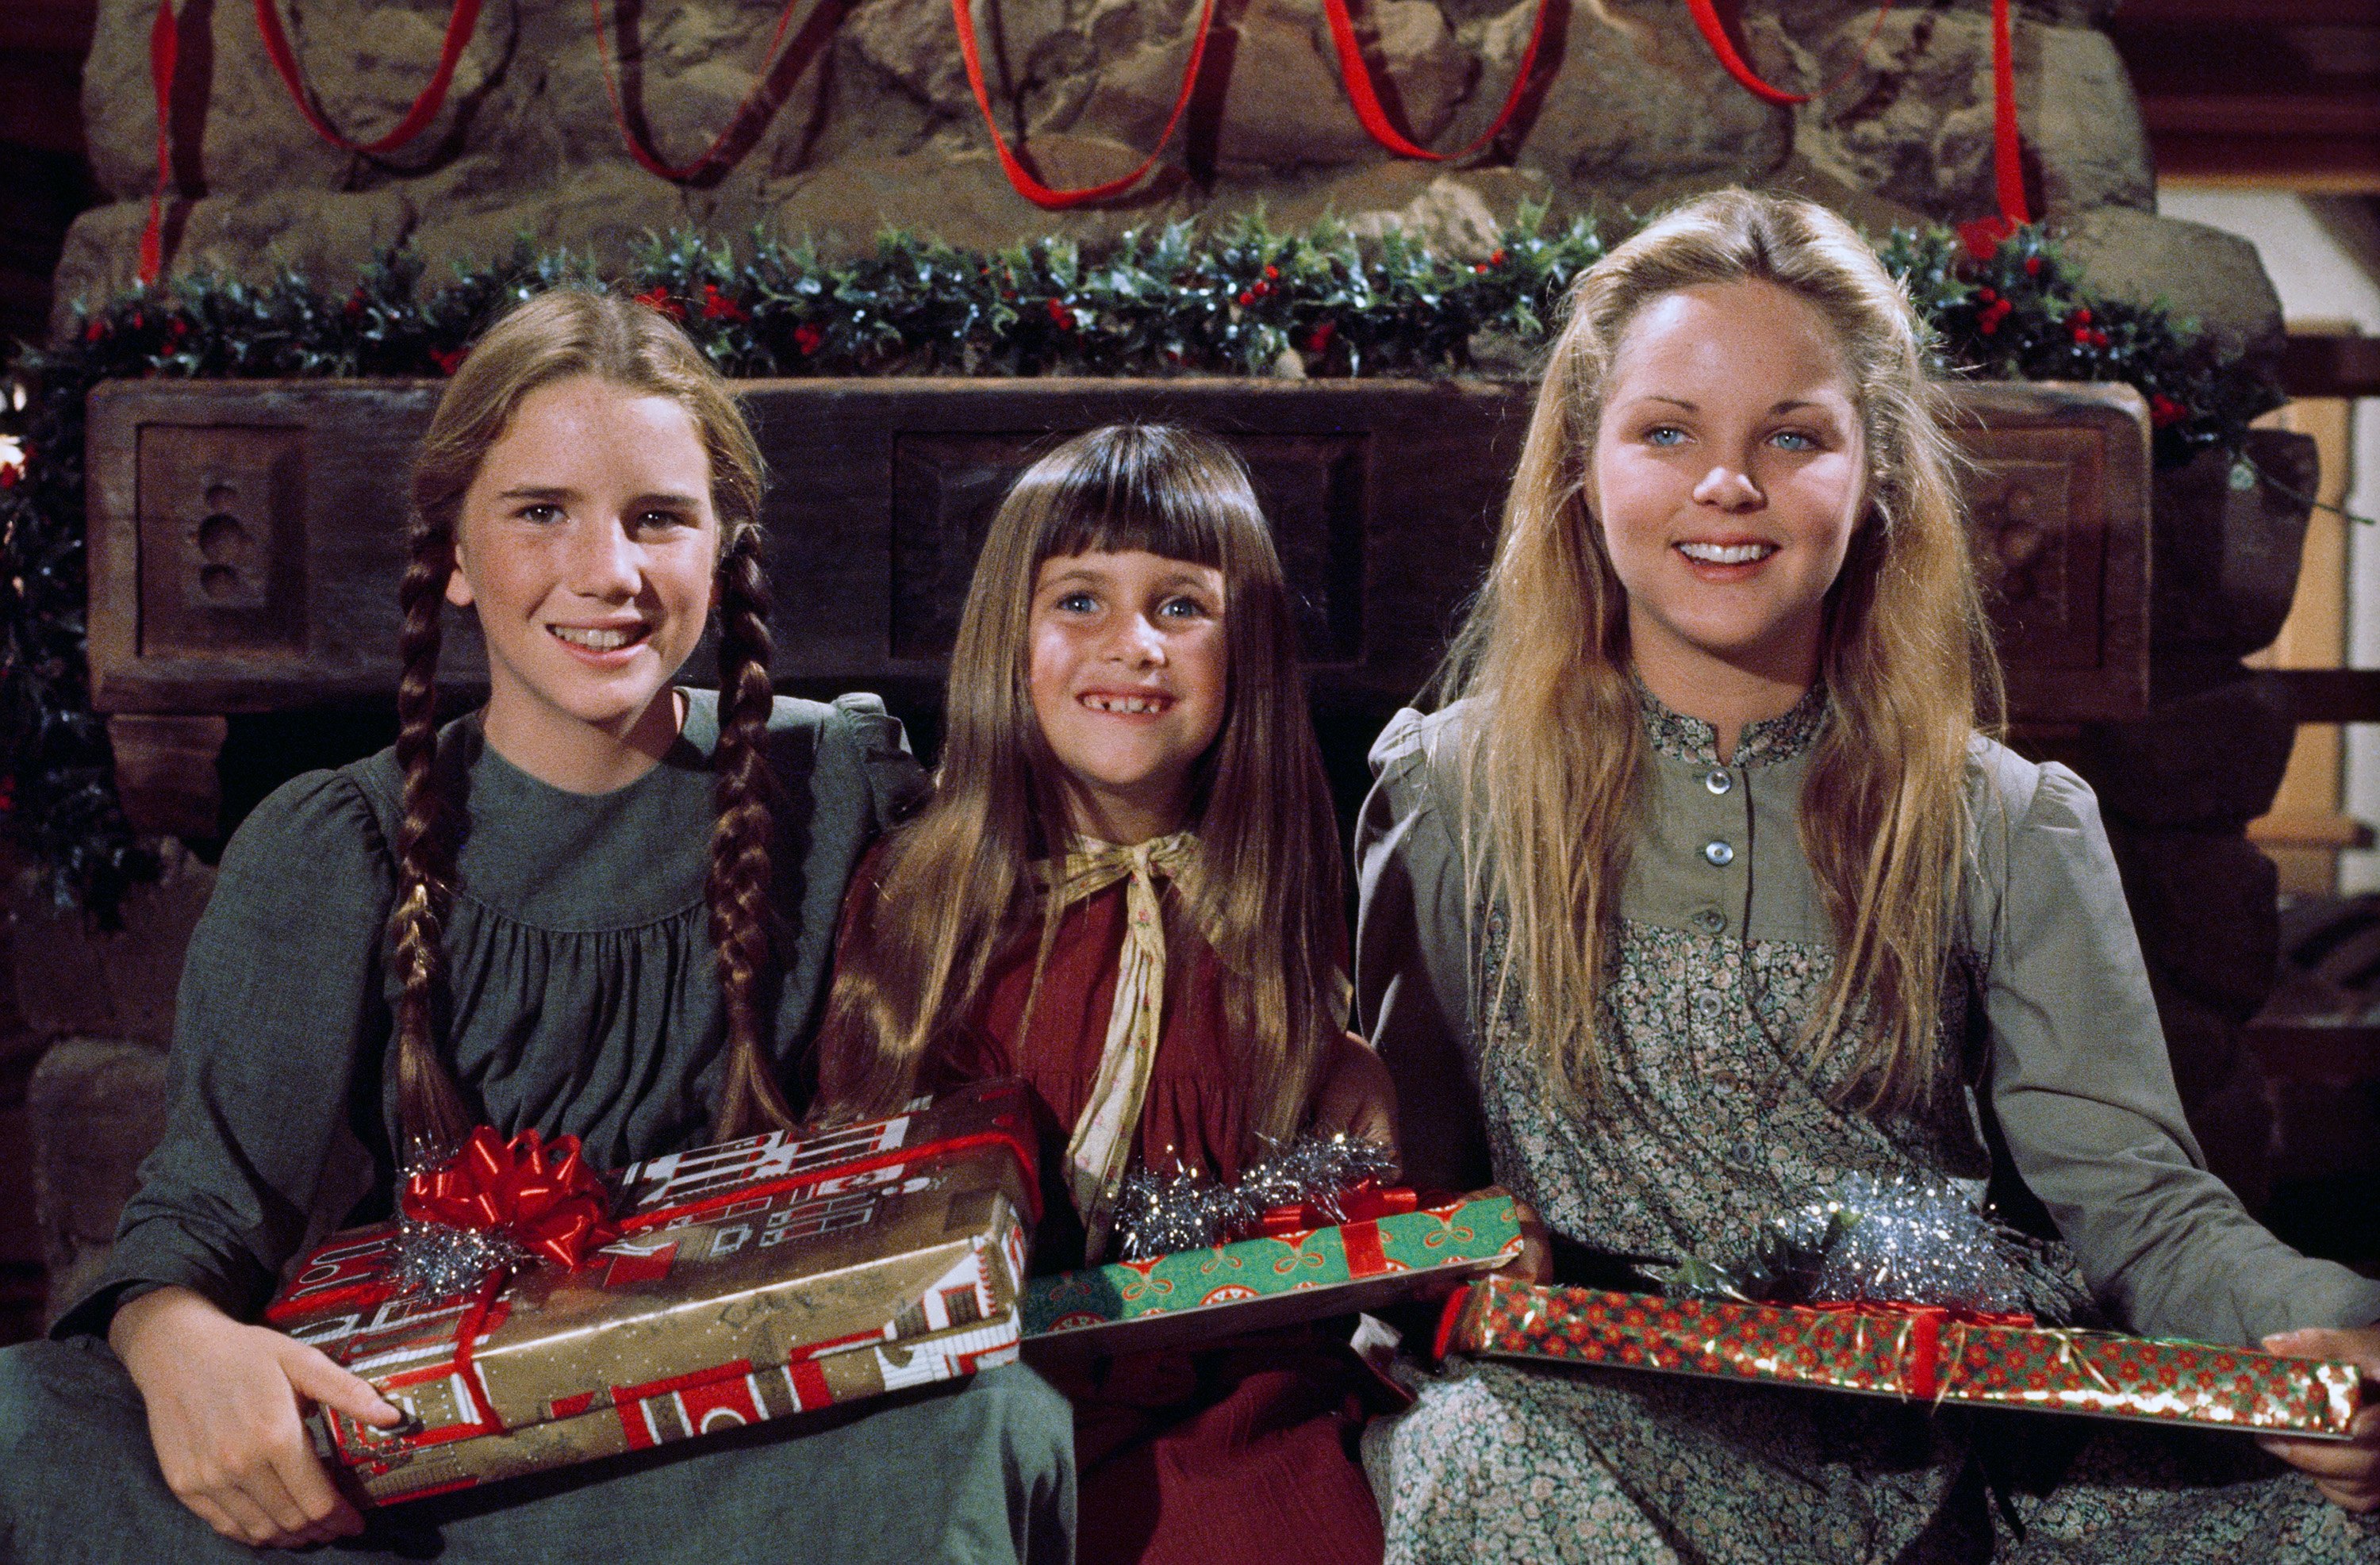 (L - R): Melissa Gilbert, Lindsay or Sydney Greenbush, and Melissa Sue Anderson as Laura, Carrie, and Mary Ingalls on 'Little House on the Prairie'